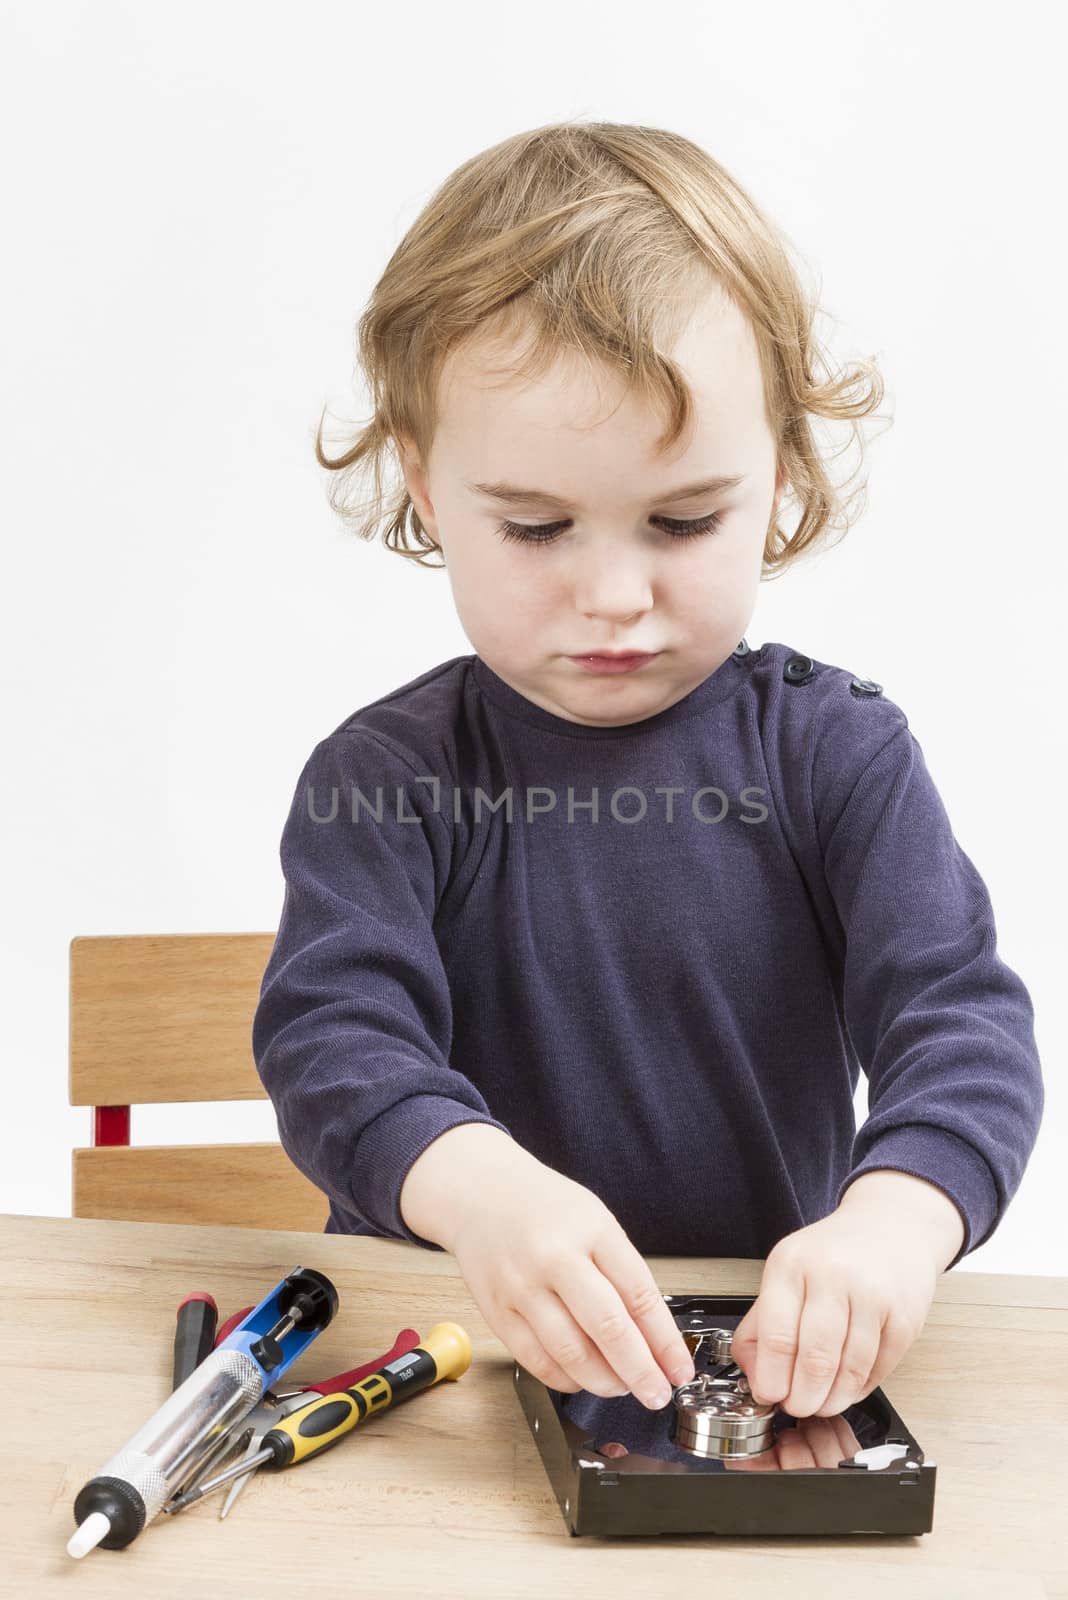 little girl repairing computer parts. studio shot with neutral grey background